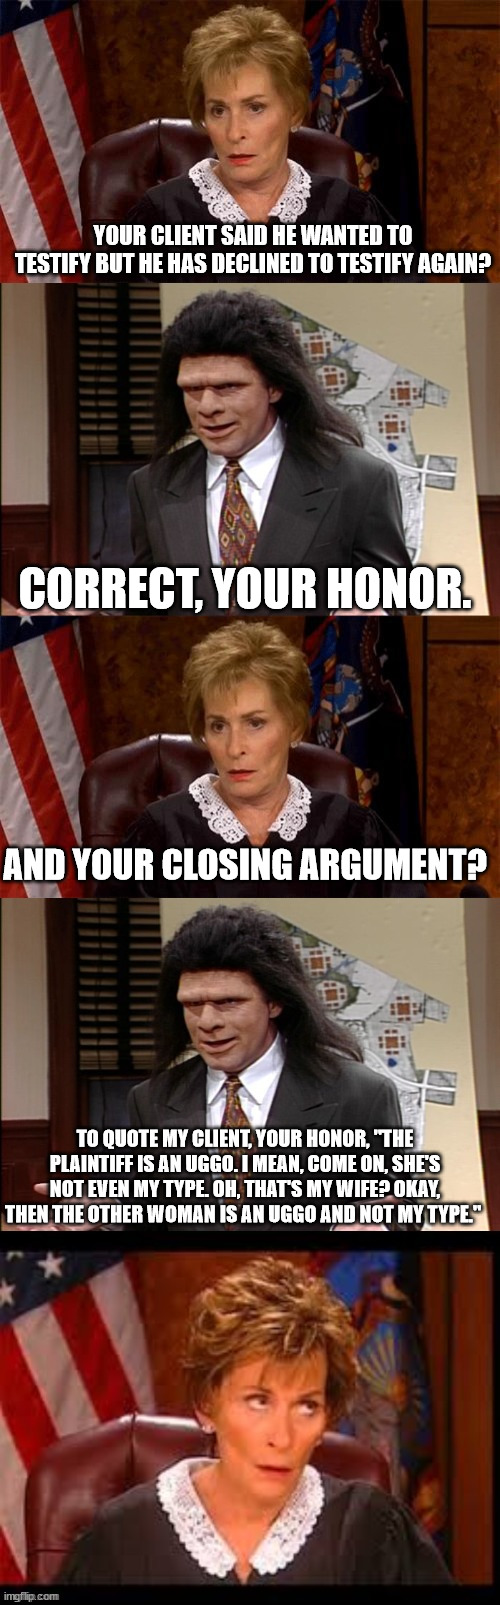 Judge v Lawyer | YOUR CLIENT SAID HE WANTED TO TESTIFY BUT HE HAS DECLINED TO TESTIFY AGAIN? CORRECT, YOUR HONOR. AND YOUR CLOSING ARGUMENT? TO QUOTE MY CLIENT, YOUR HONOR, "THE PLAINTIFF IS AN UGGO. I MEAN, COME ON, SHE'S NOT EVEN MY TYPE. OH, THAT'S MY WIFE? OKAY, THEN THE OTHER WOMAN IS AN UGGO AND NOT MY TYPE." | image tagged in judge v lawyer | made w/ Imgflip meme maker